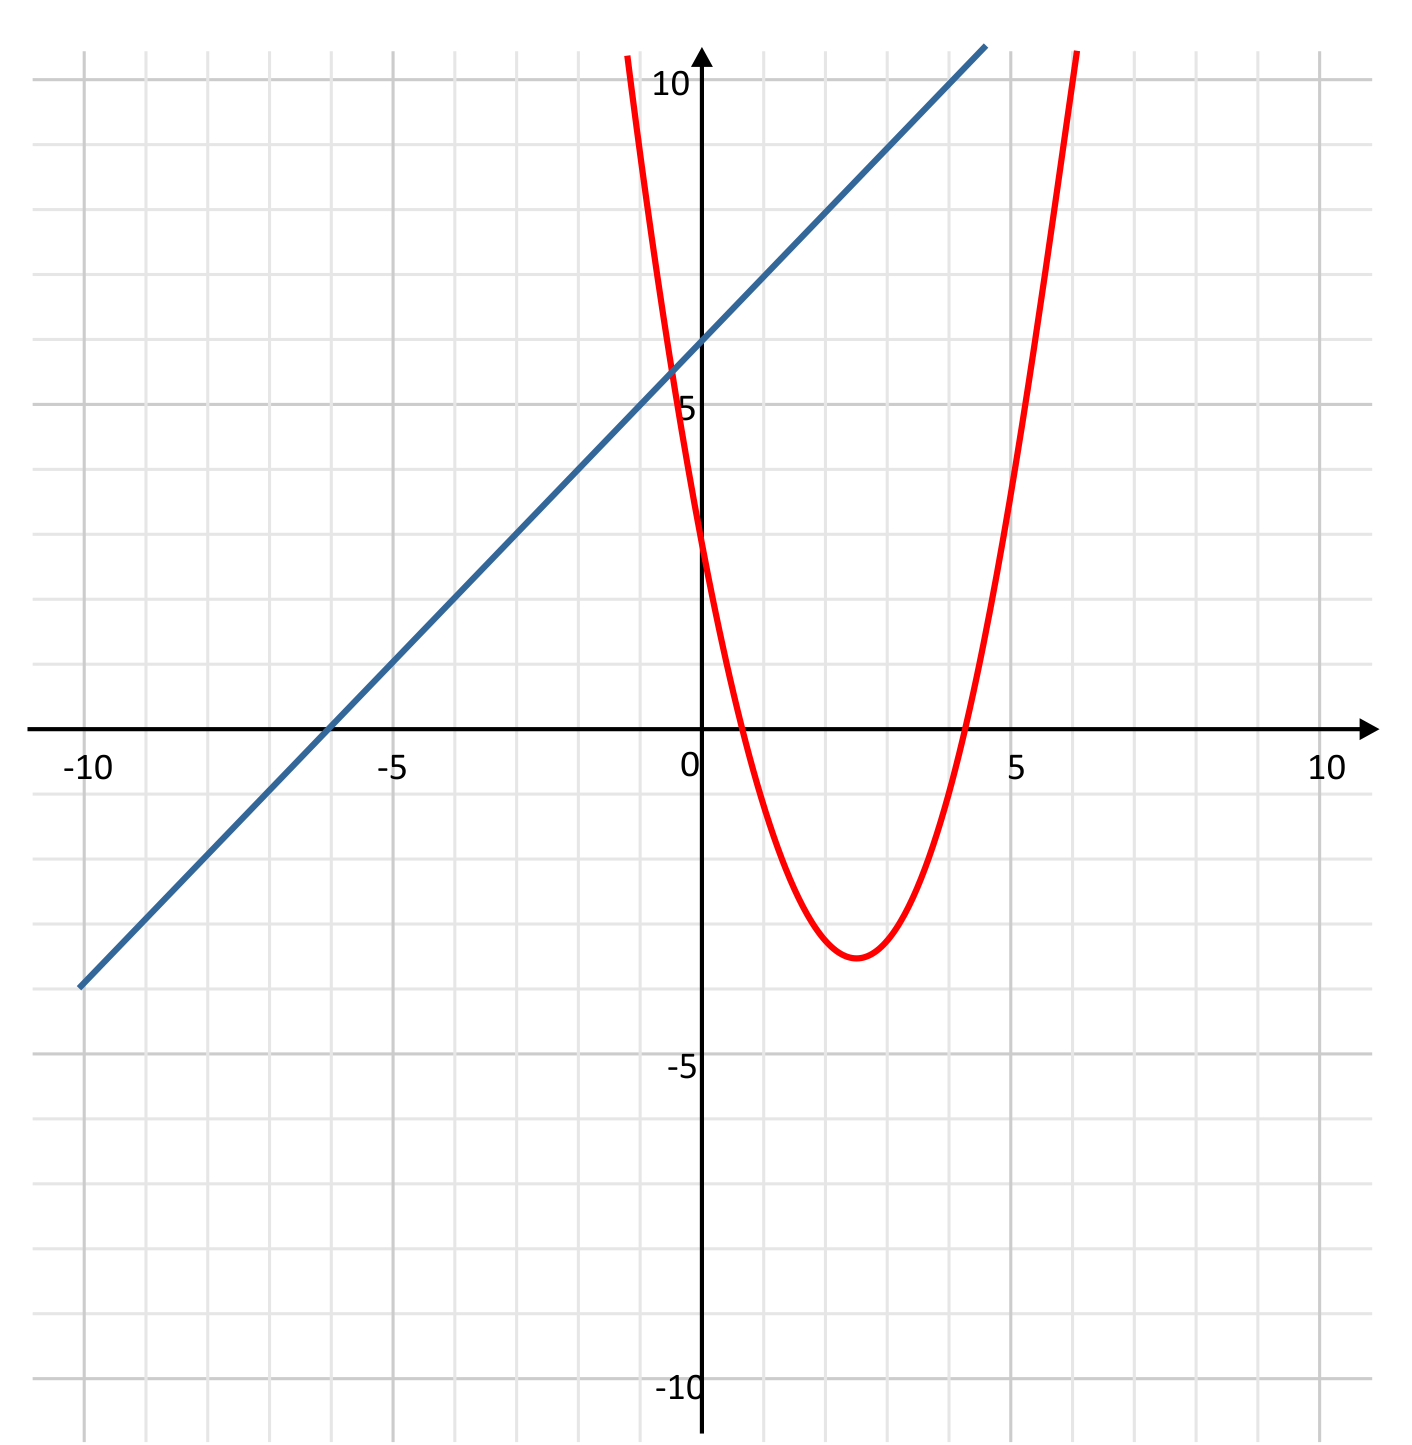 parabola and linear line intersecting at (-0.5,5.5) on a graph